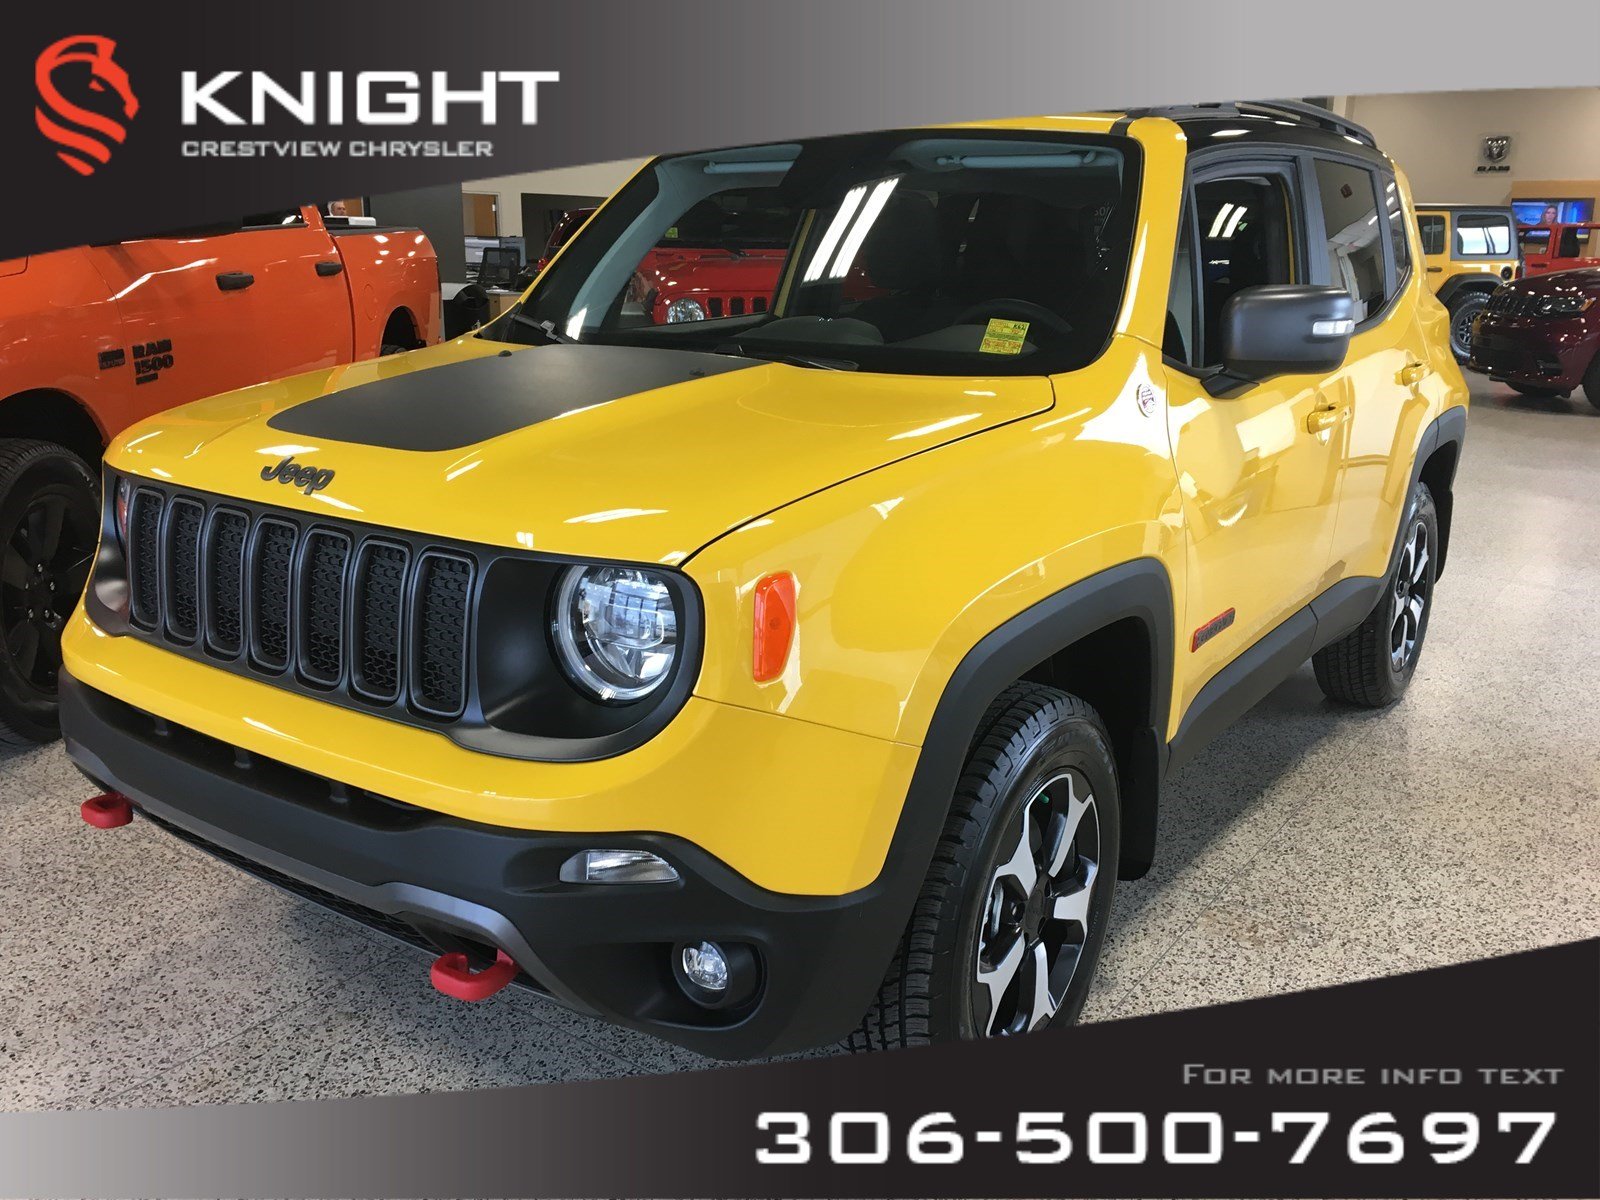 New 2019 Jeep Renegade Trailhawk 4x4 Heated Seats And Steering Wheel Sunroof Navigation 4wd Sport Utility